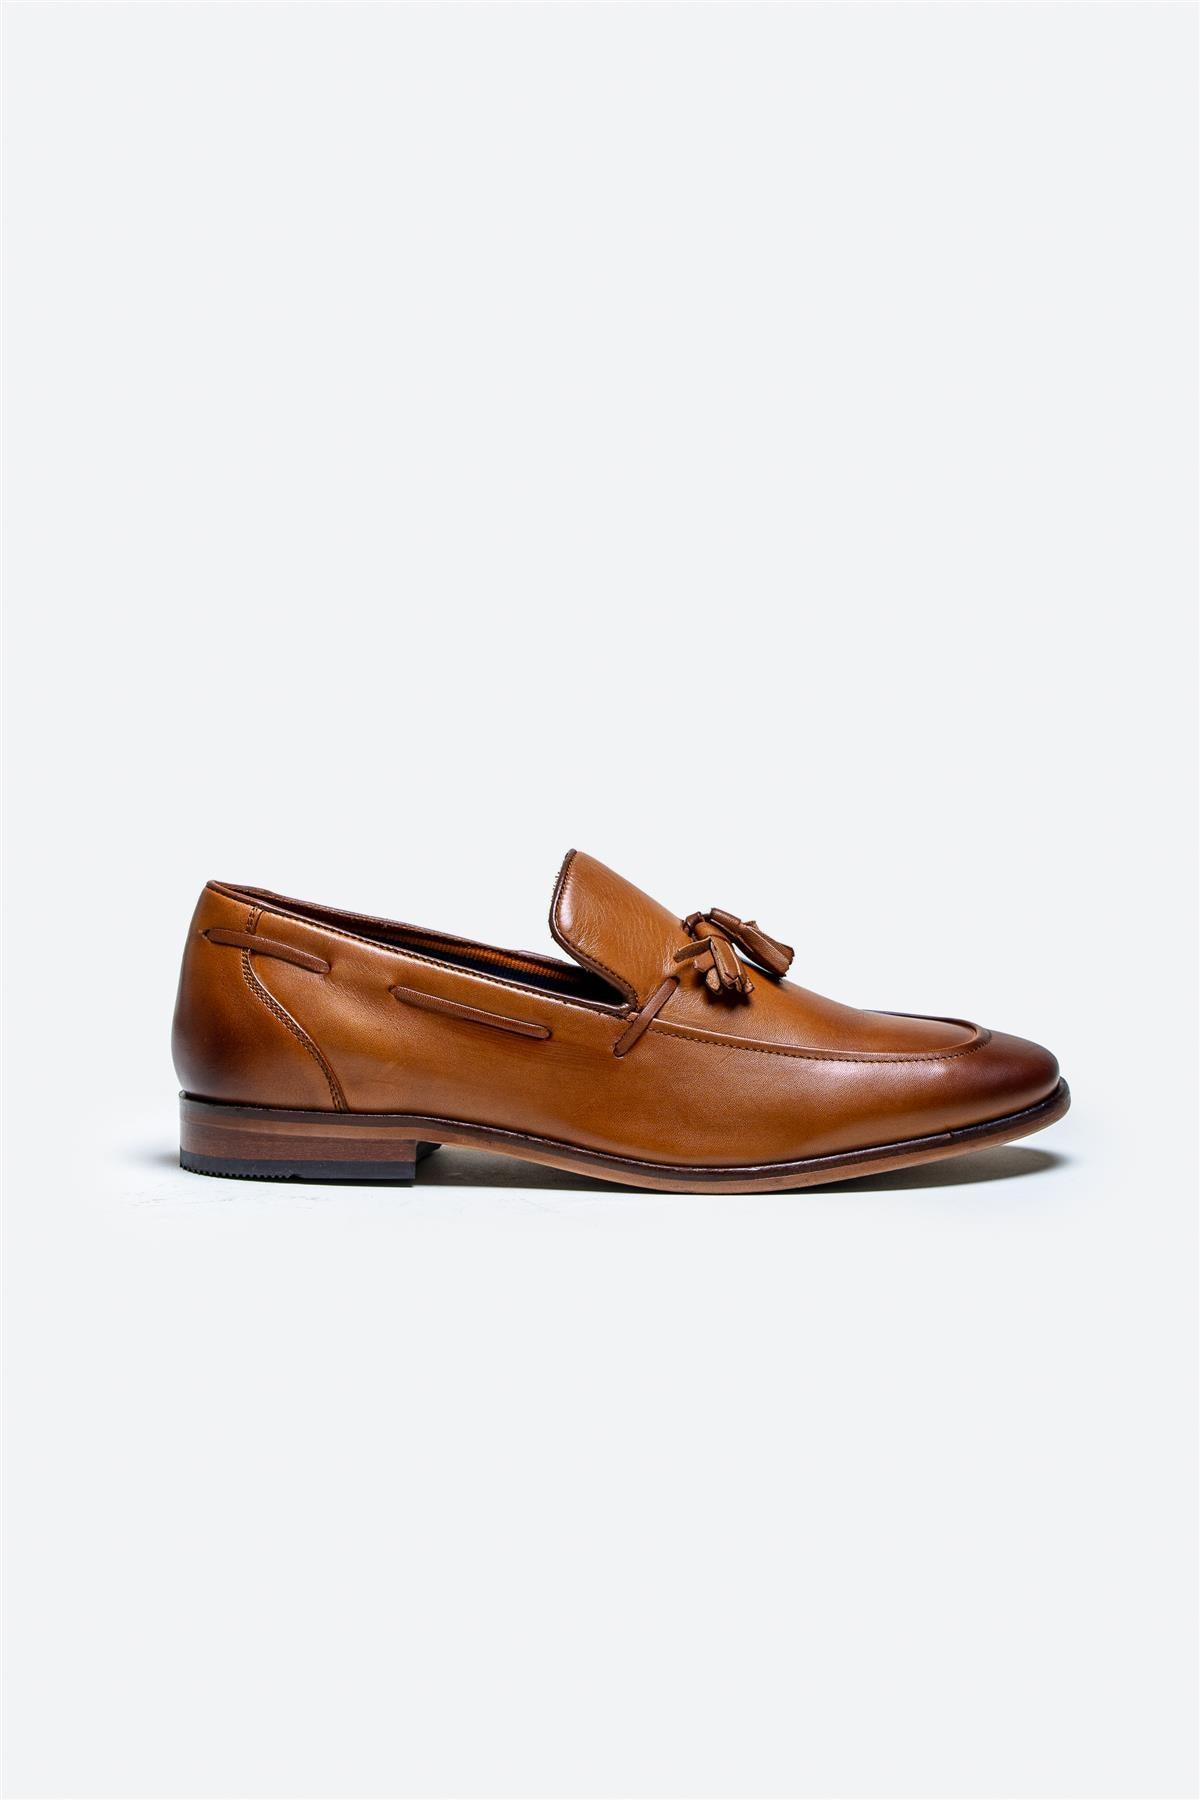 Freemont tan loafers side